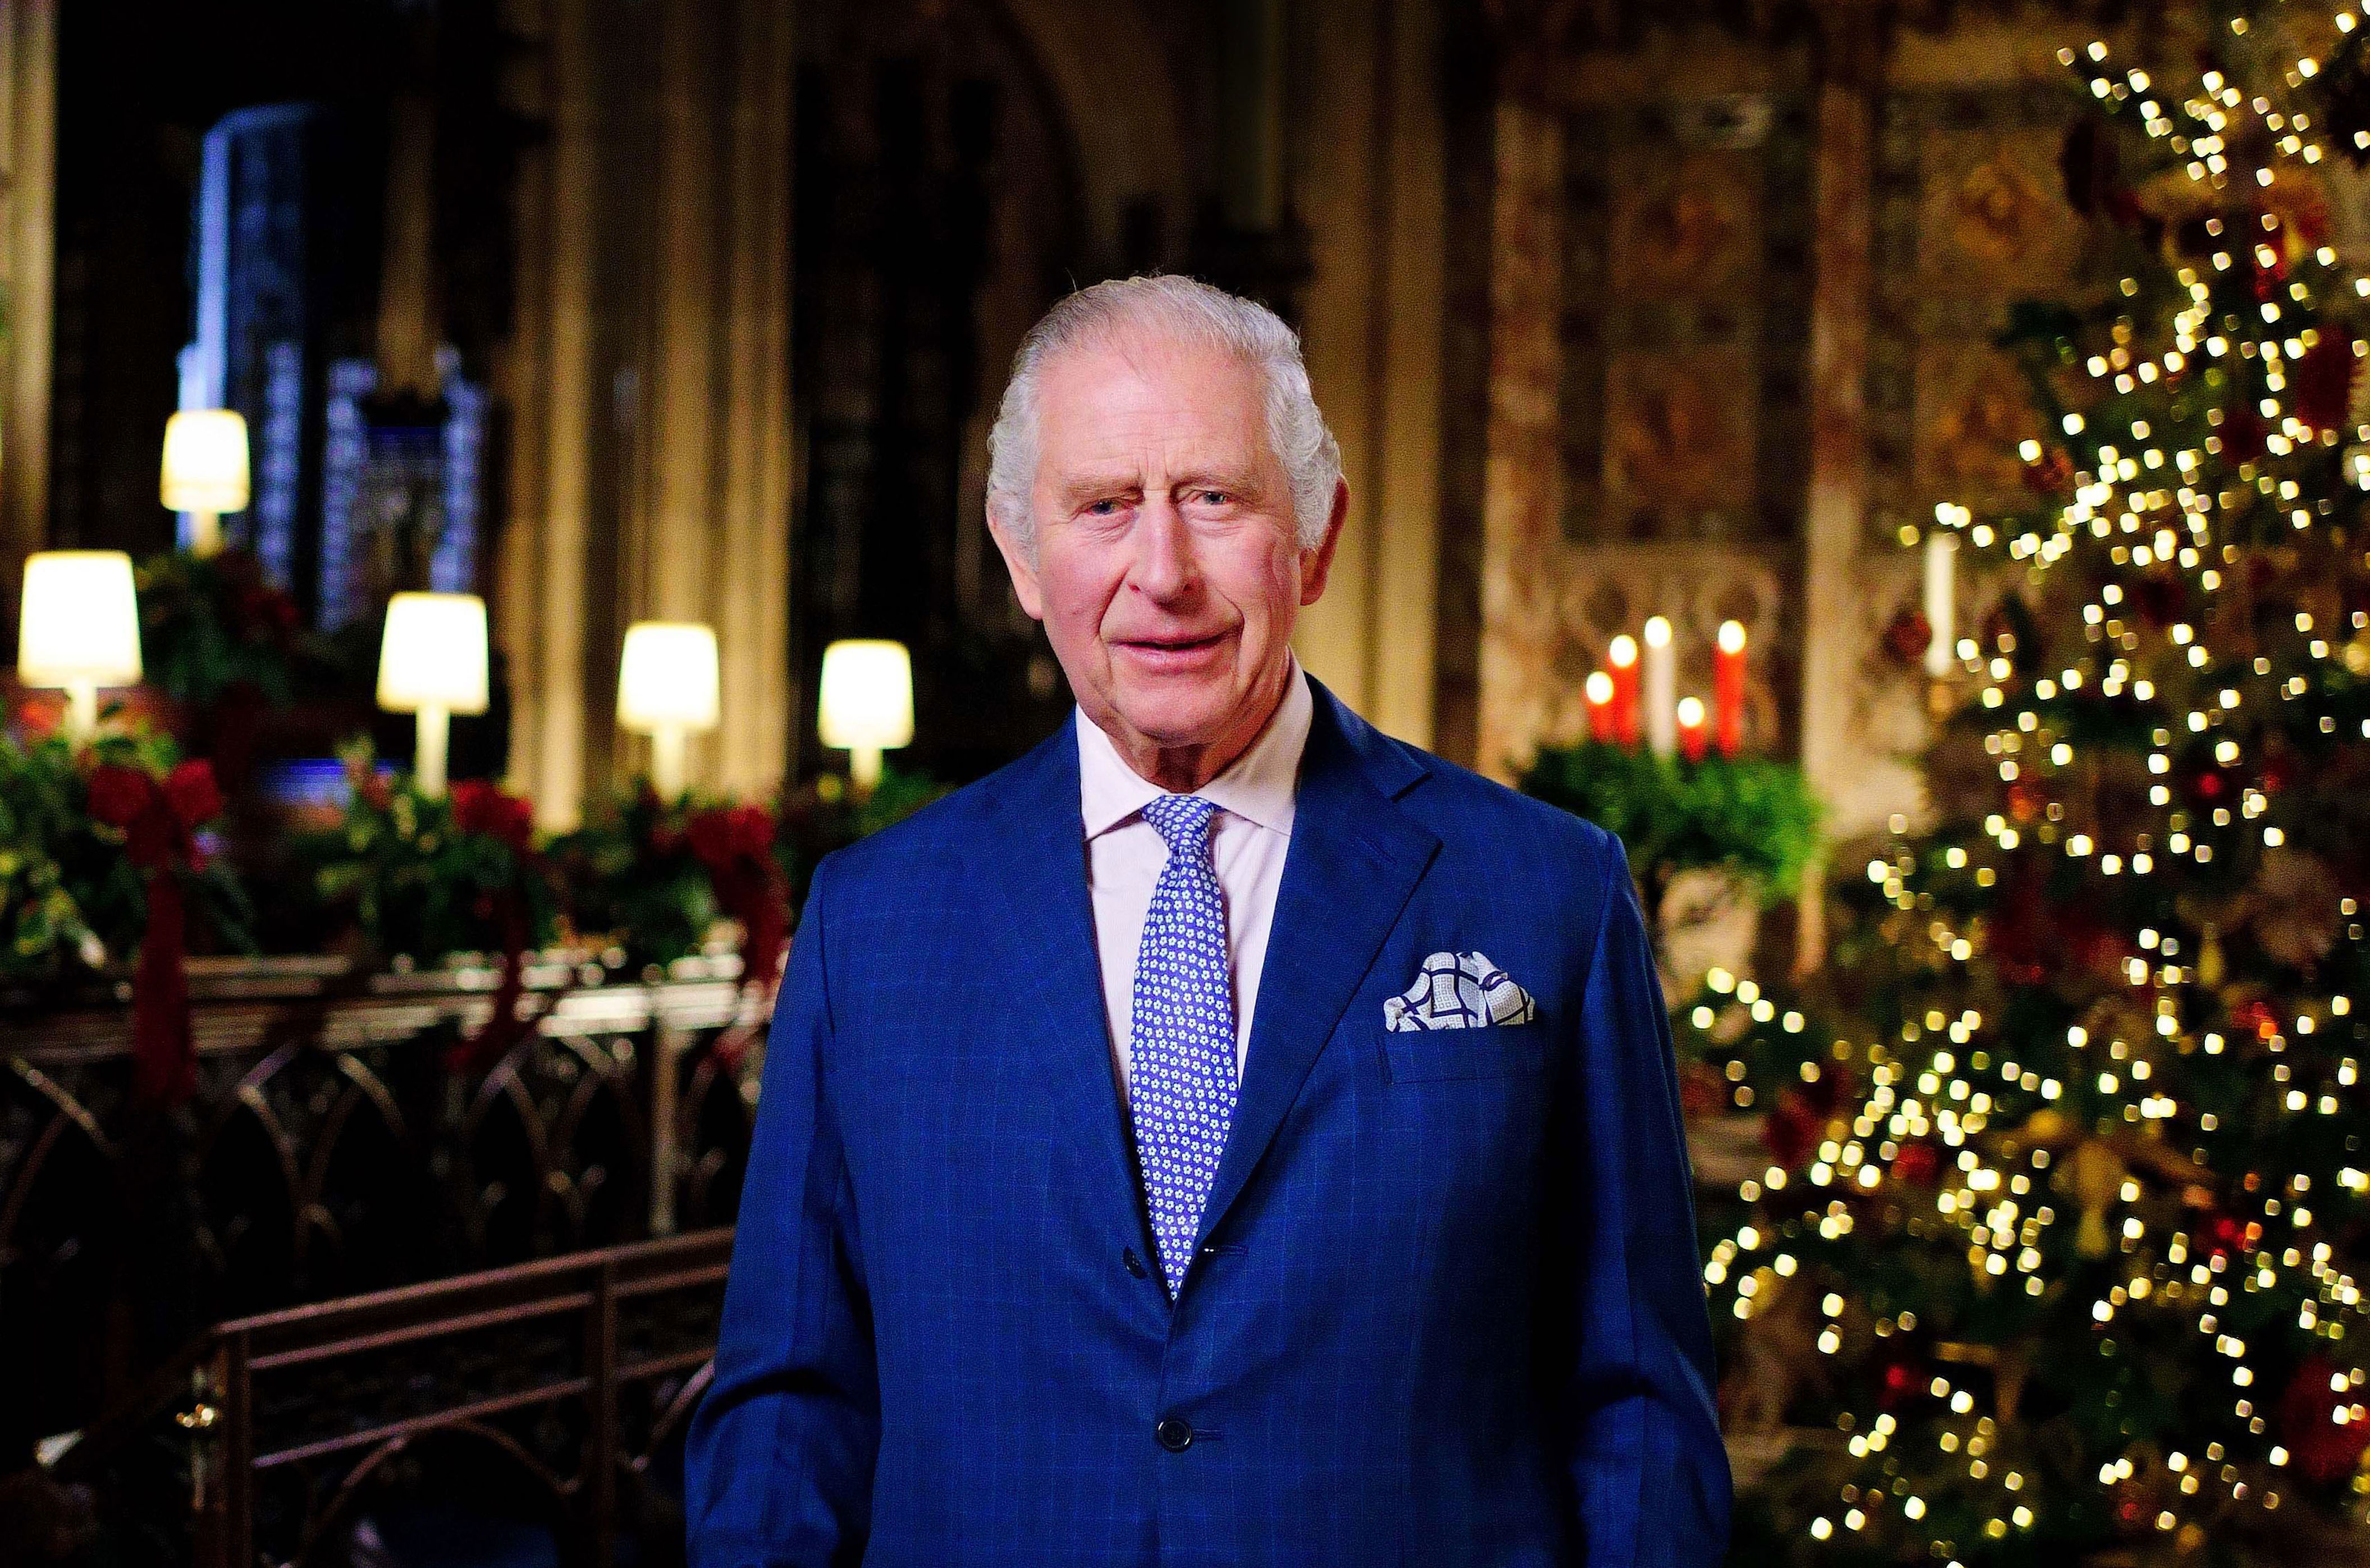 <p>In this image released on Dec. 23, 2022, King Charles III is seen recording his very first Christmas broadcast as sovereign. He taped his speech -- which will be aired across Britain on Christmas Day at 3 p.m. local time -- in the Quire of St. George's Chapel at Windsor Castle in Windsor, England, on Dec. 13, 2022.</p>